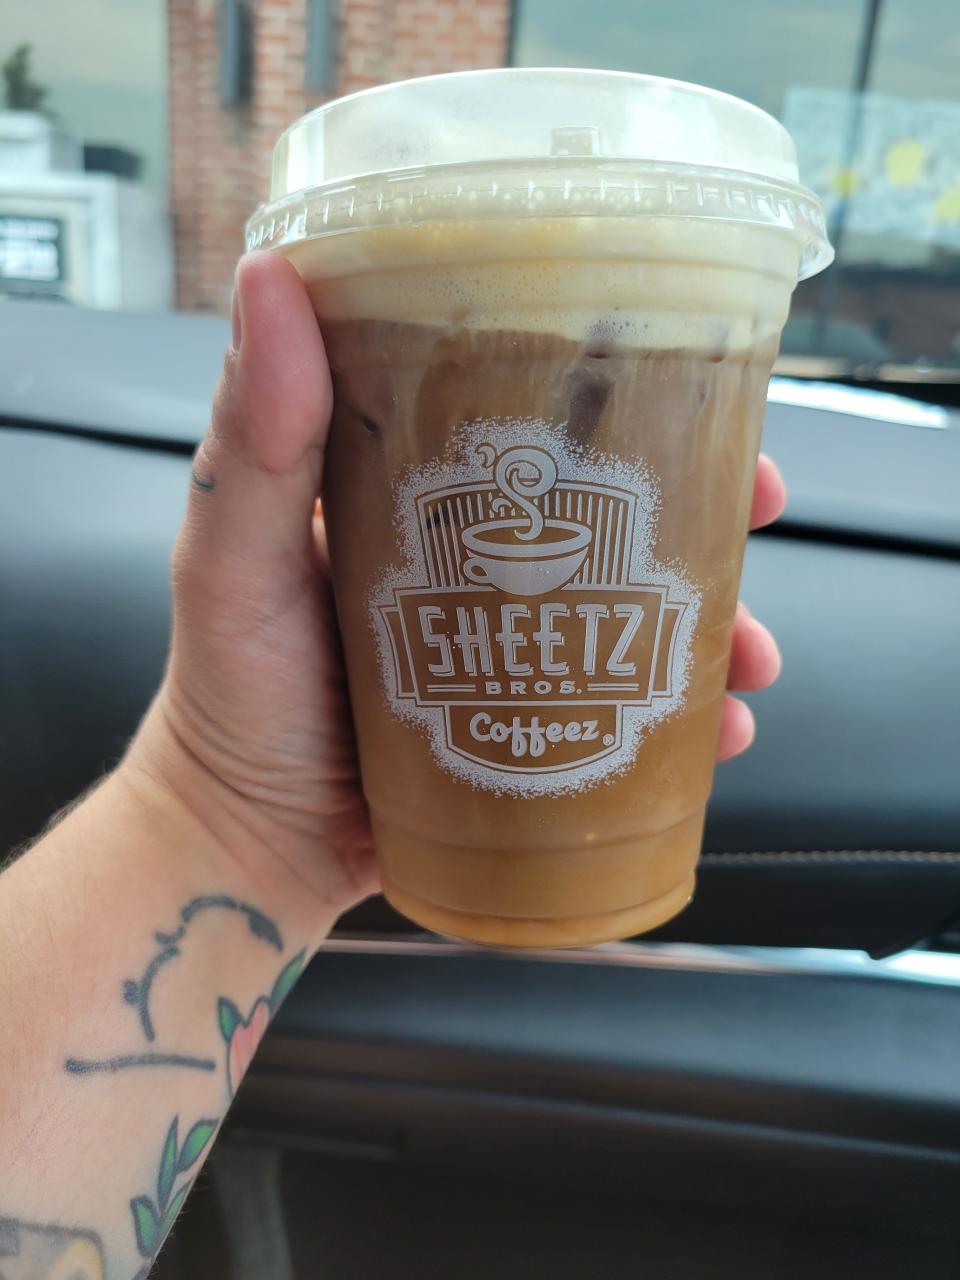 This iced coffee from Sheetz ranked second on the list of best gas station iced coffees.